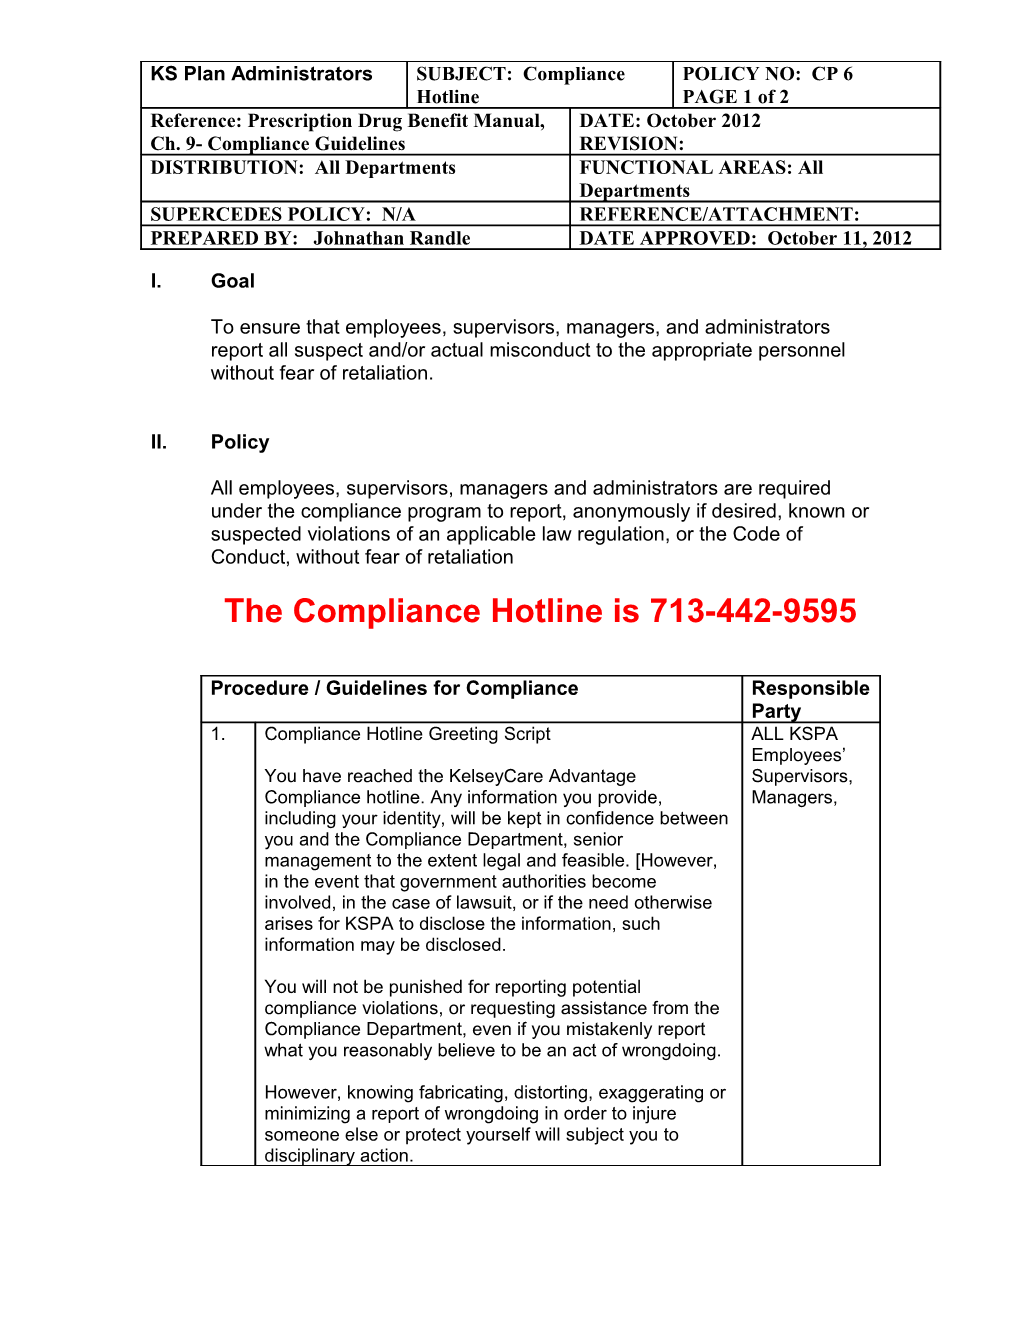 The Compliance Hotline Is 713-442-9595